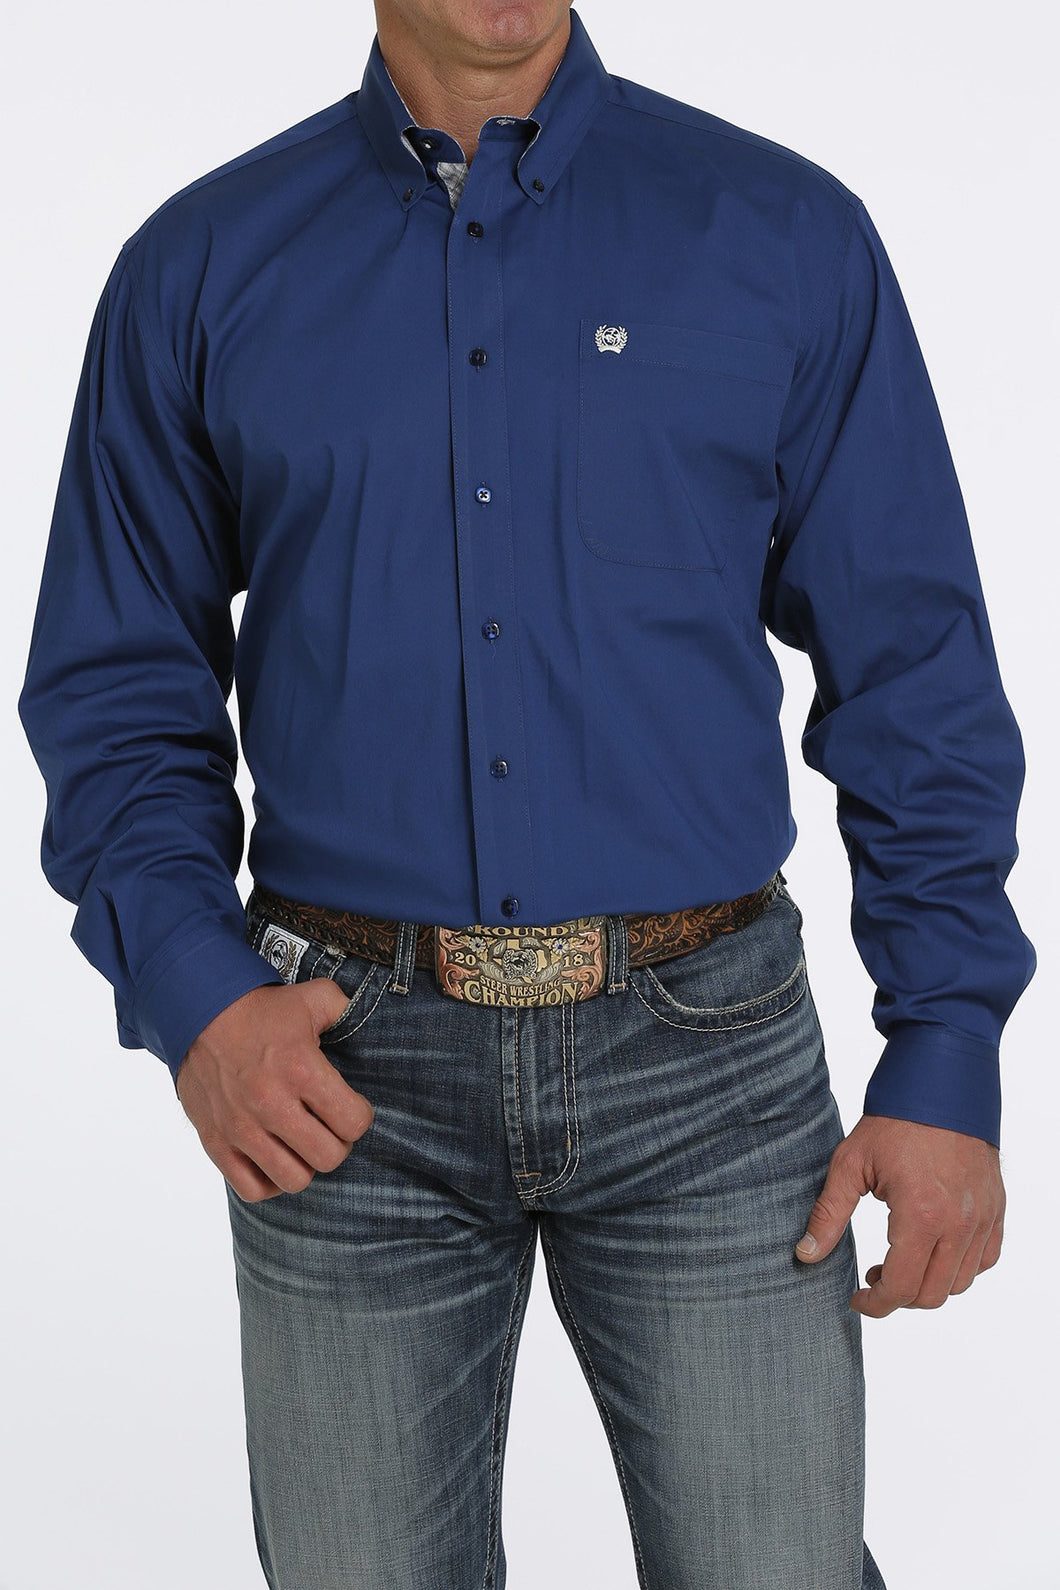 MEN'S STRETCH SOLID BUTTON-DOWN WESTERN SHIRT - ROYAL BLUE